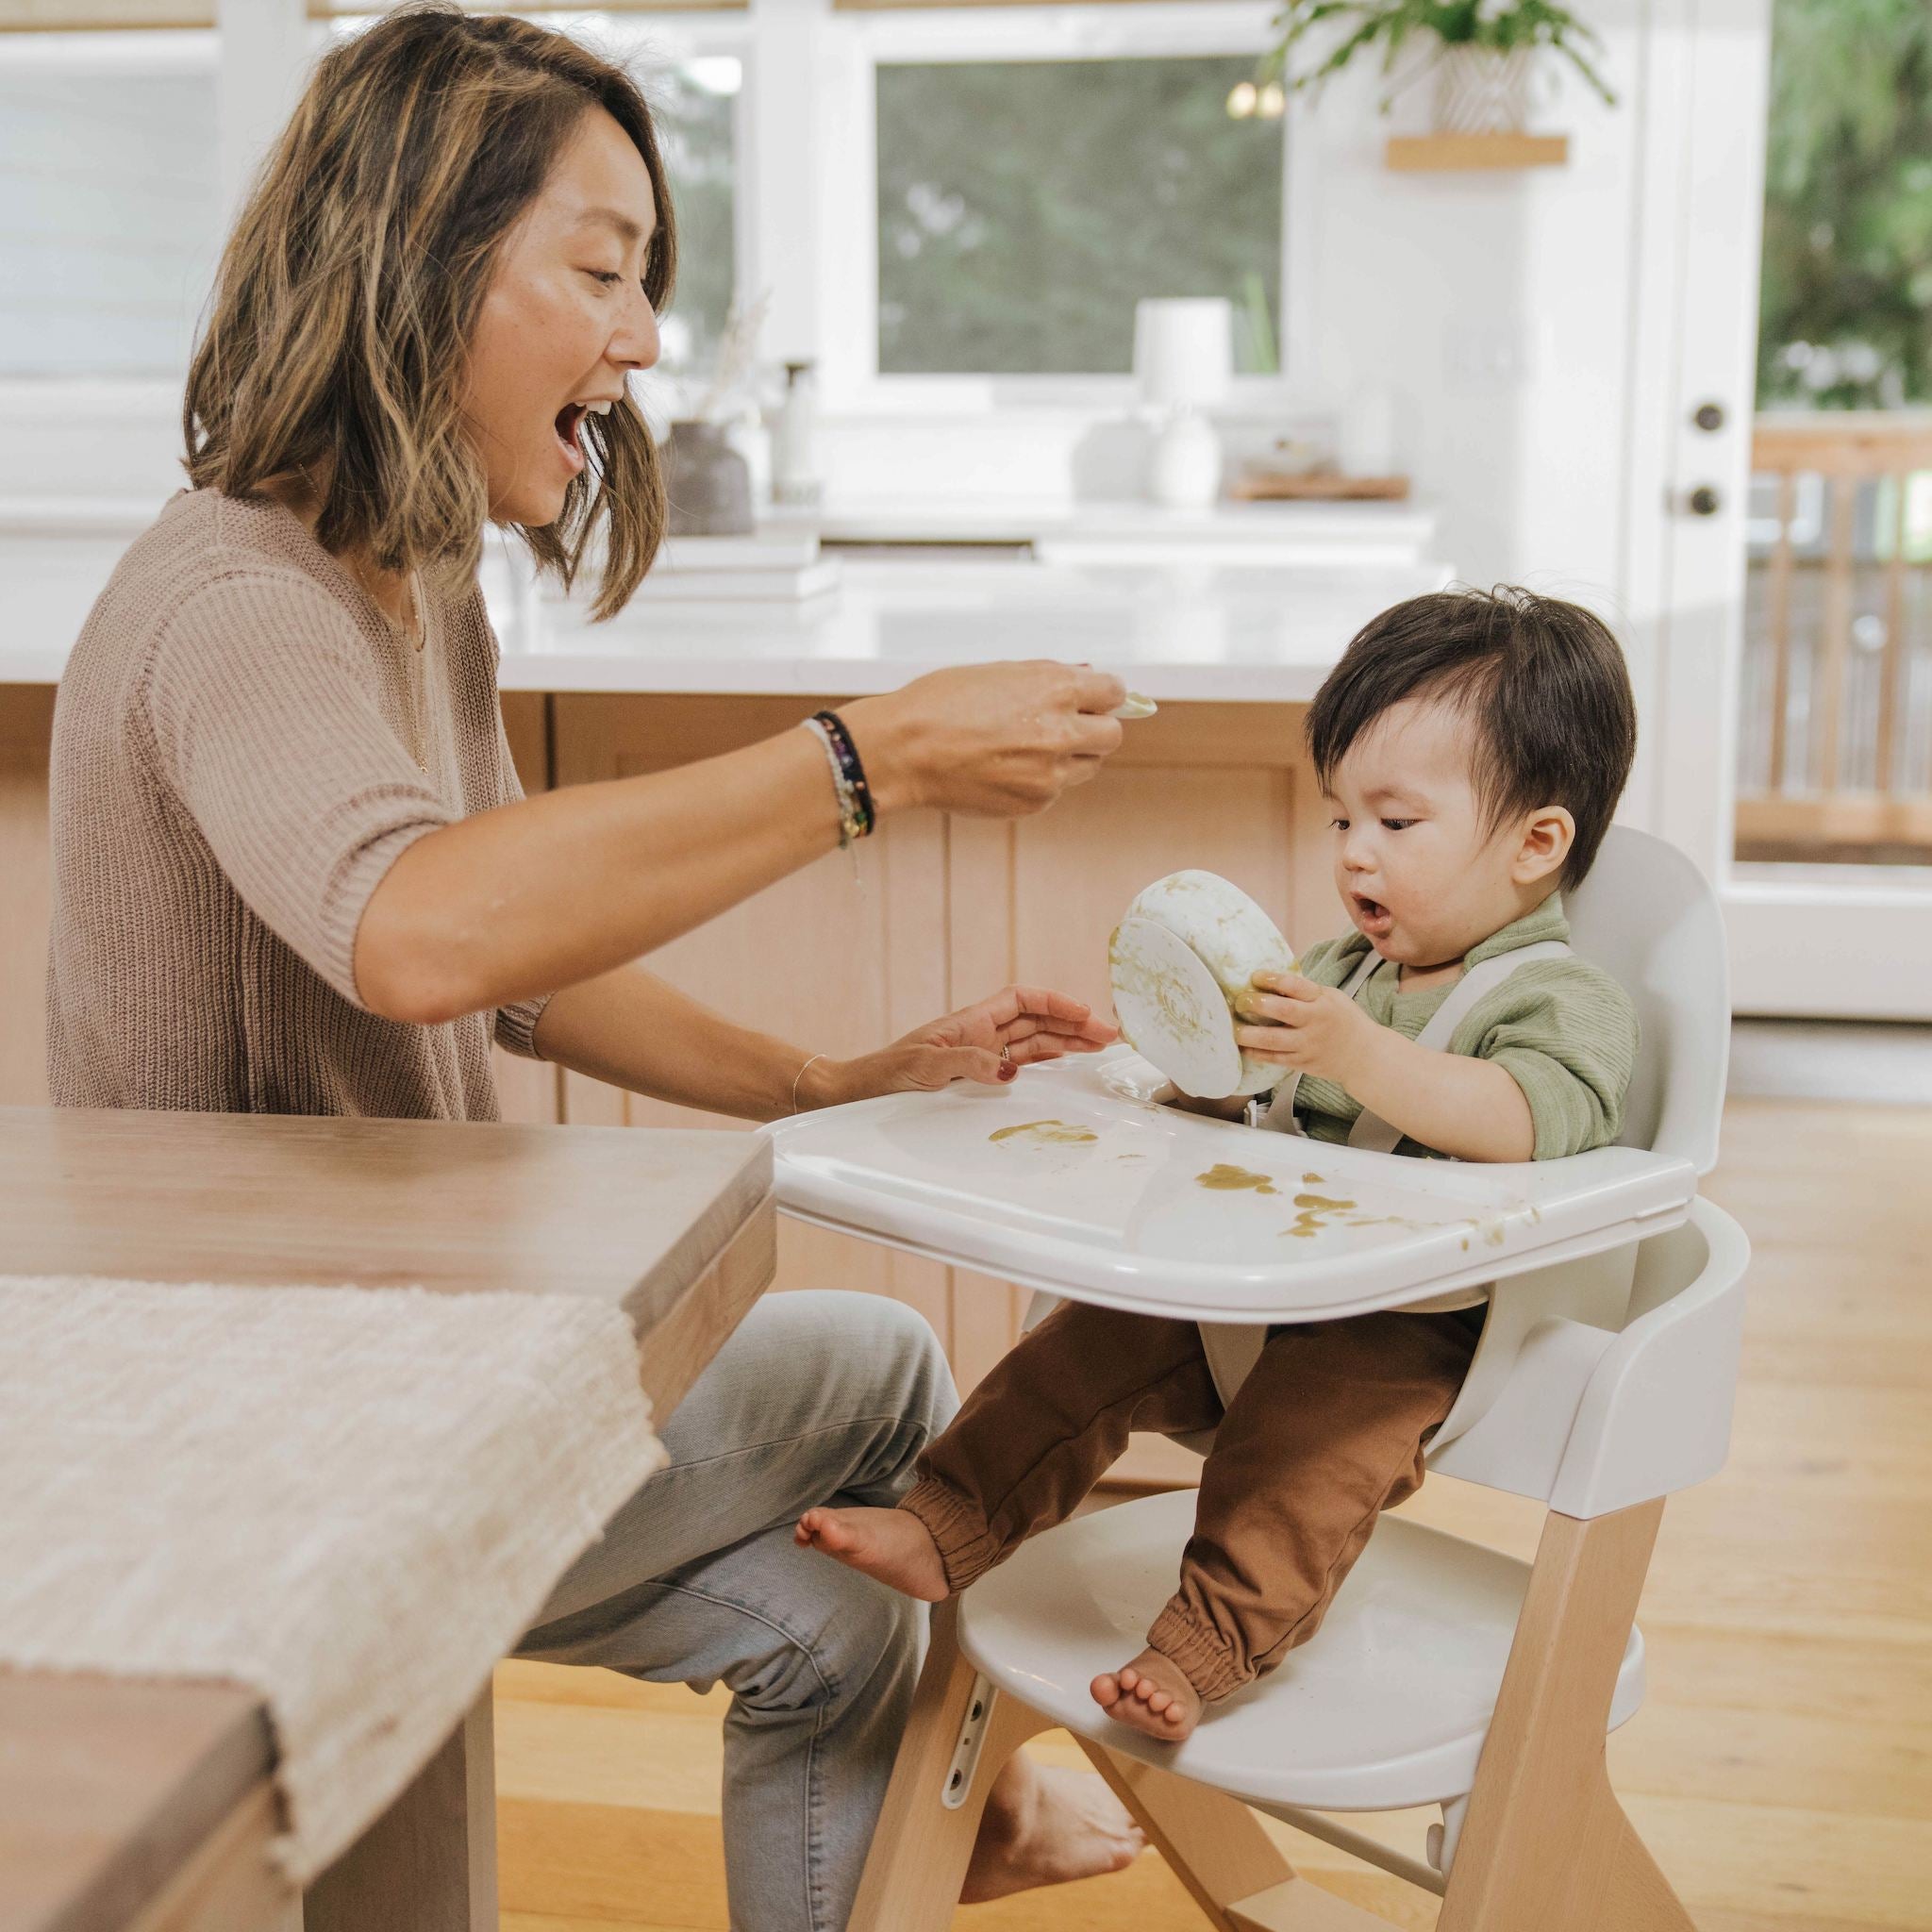 A mother feeding her toddler in a high chair, both smiling as the child attempts to eat by himself.